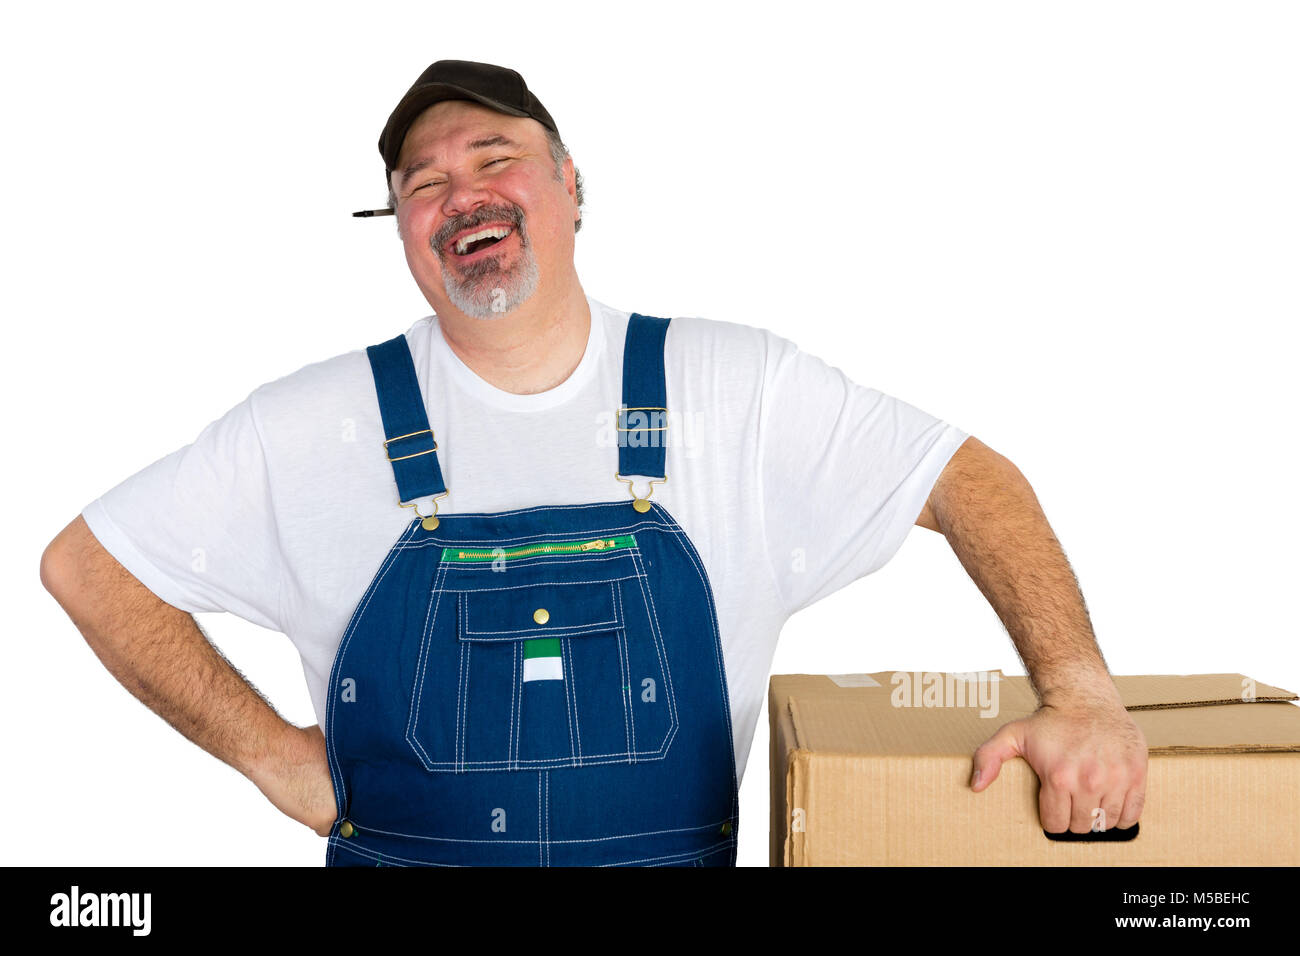 Cheerful delivery wearing dungarees man standing by big box against white background Stock Photo